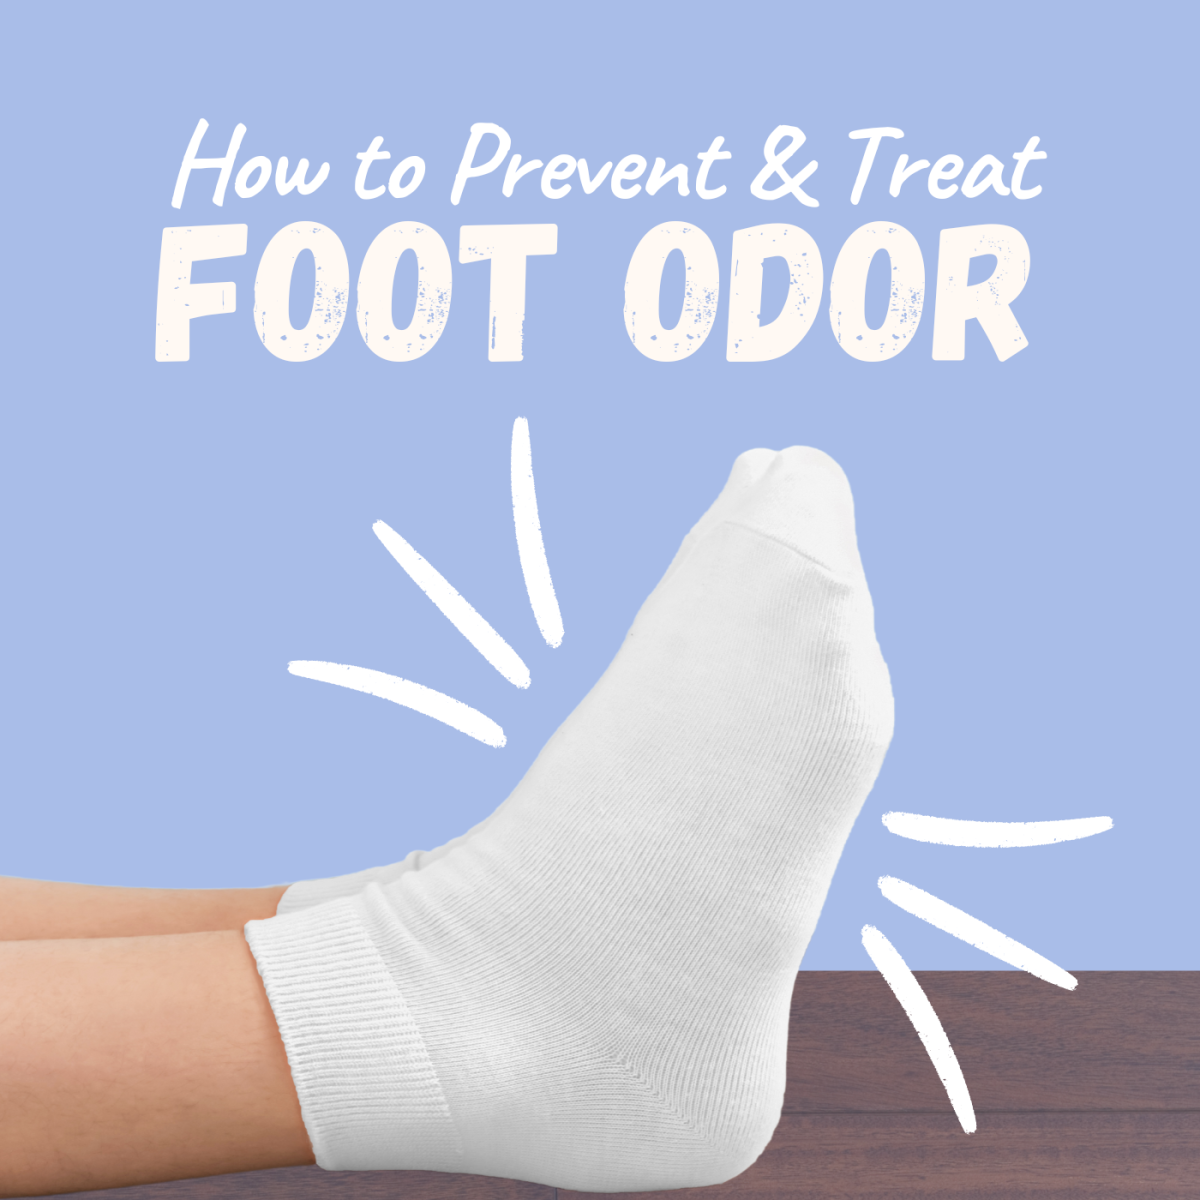 Ways to prevent and treat foot odor